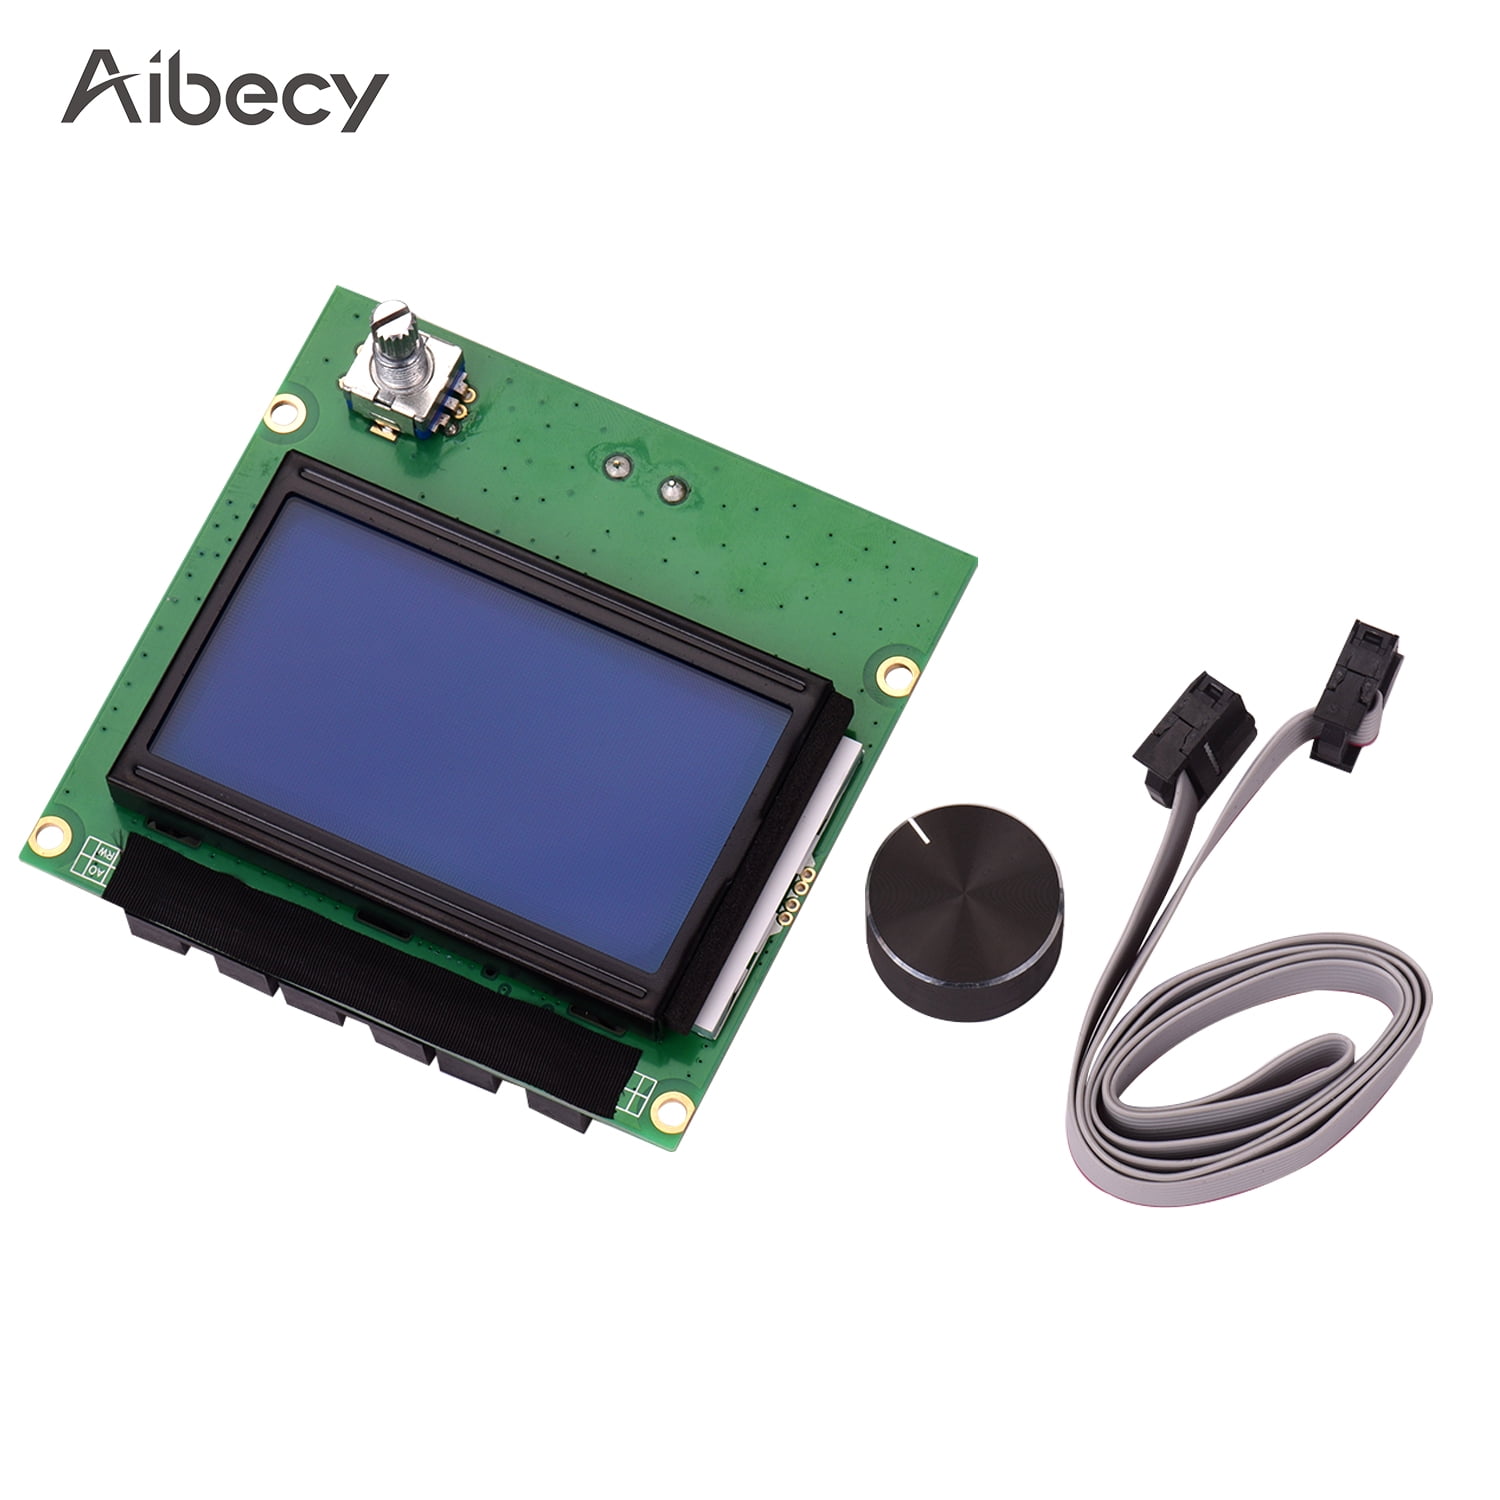 Ender-3 Pro Ender-3s Aibecy Creality 3D LCD Screen Controller Module LCD Display with Cable for 3D Printer Accessories Ender-3